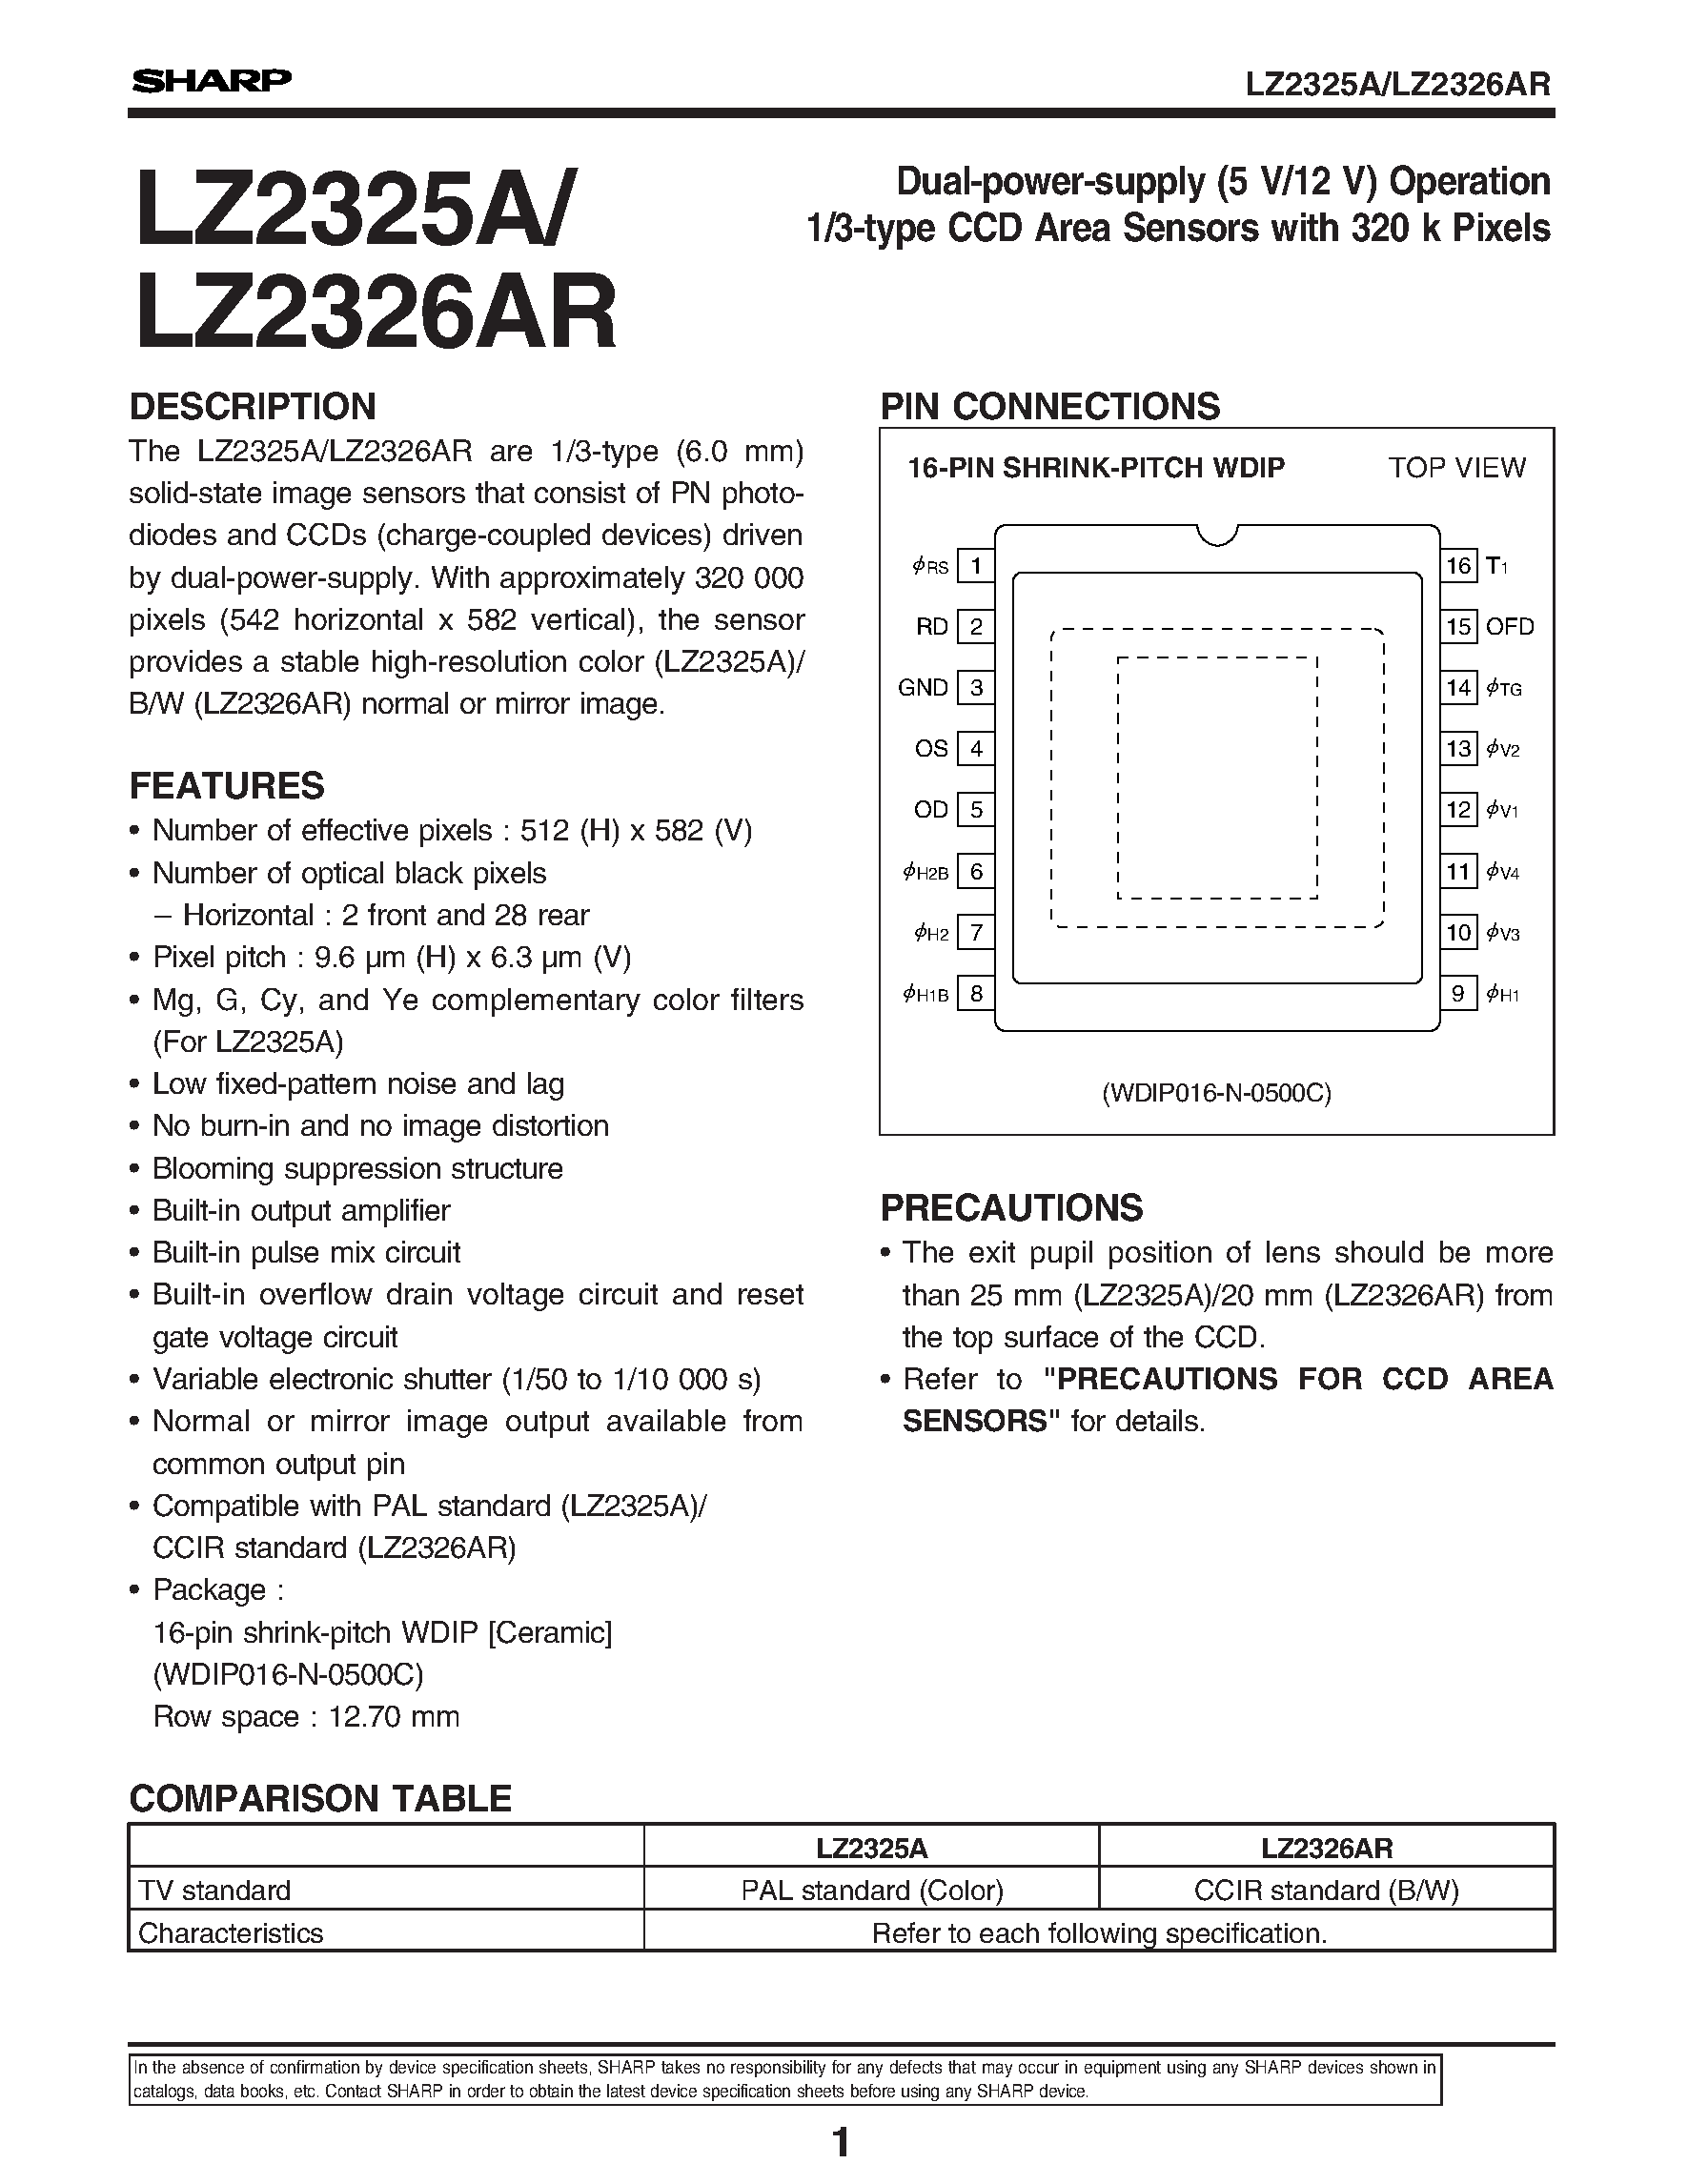 Datasheet LZ2325A - Dual-power-supply (5 V/12 V) Operation 1/3-type CCD Area Sensors with 320 k Pixels page 1